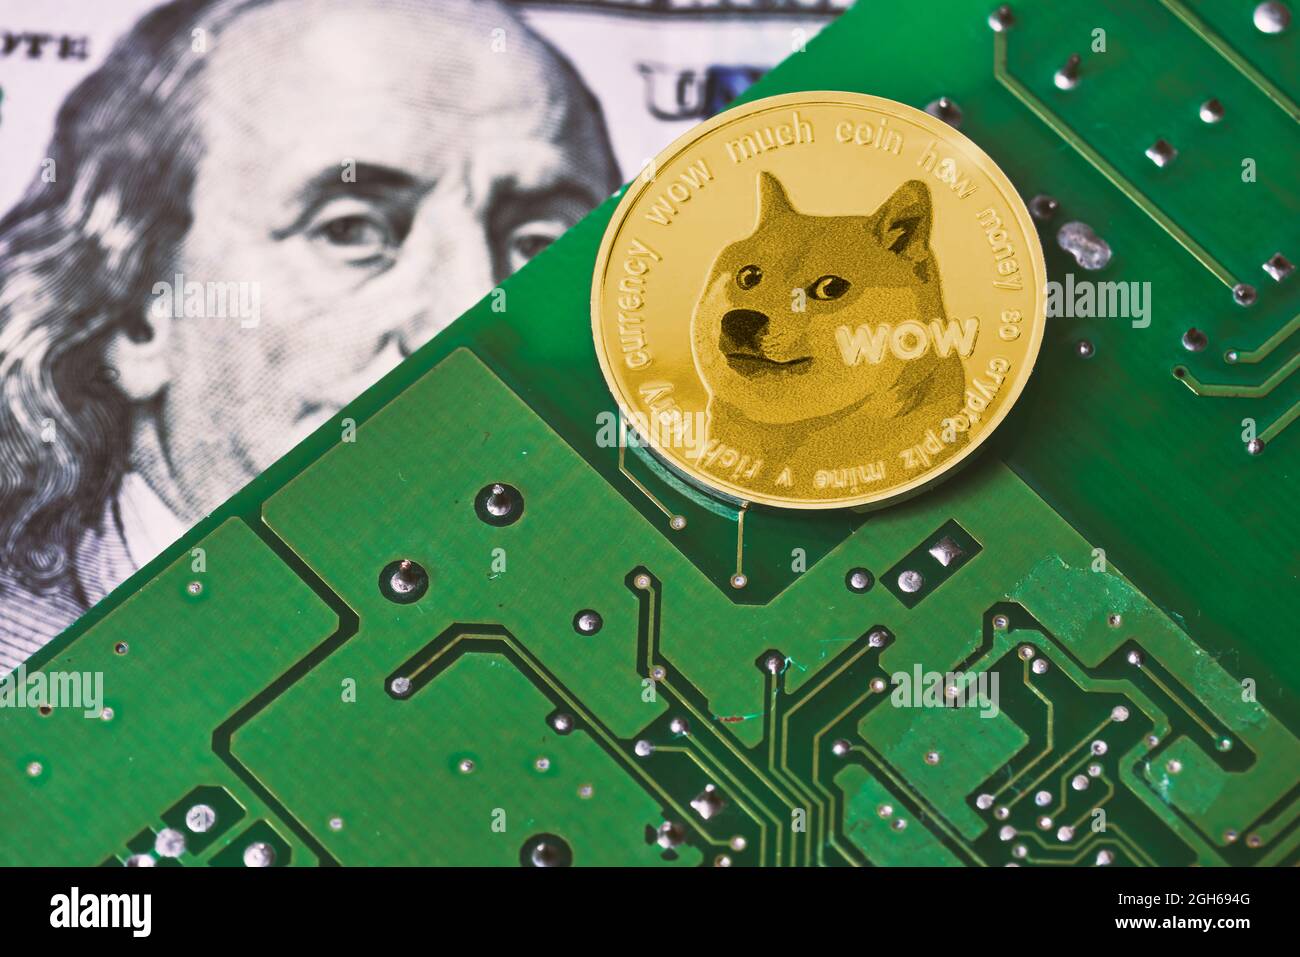 Dogecoin on computer motherboard surface and us dollar bill. US dollar banknote, printed circuit board and popular Dogecoin Stock Photo